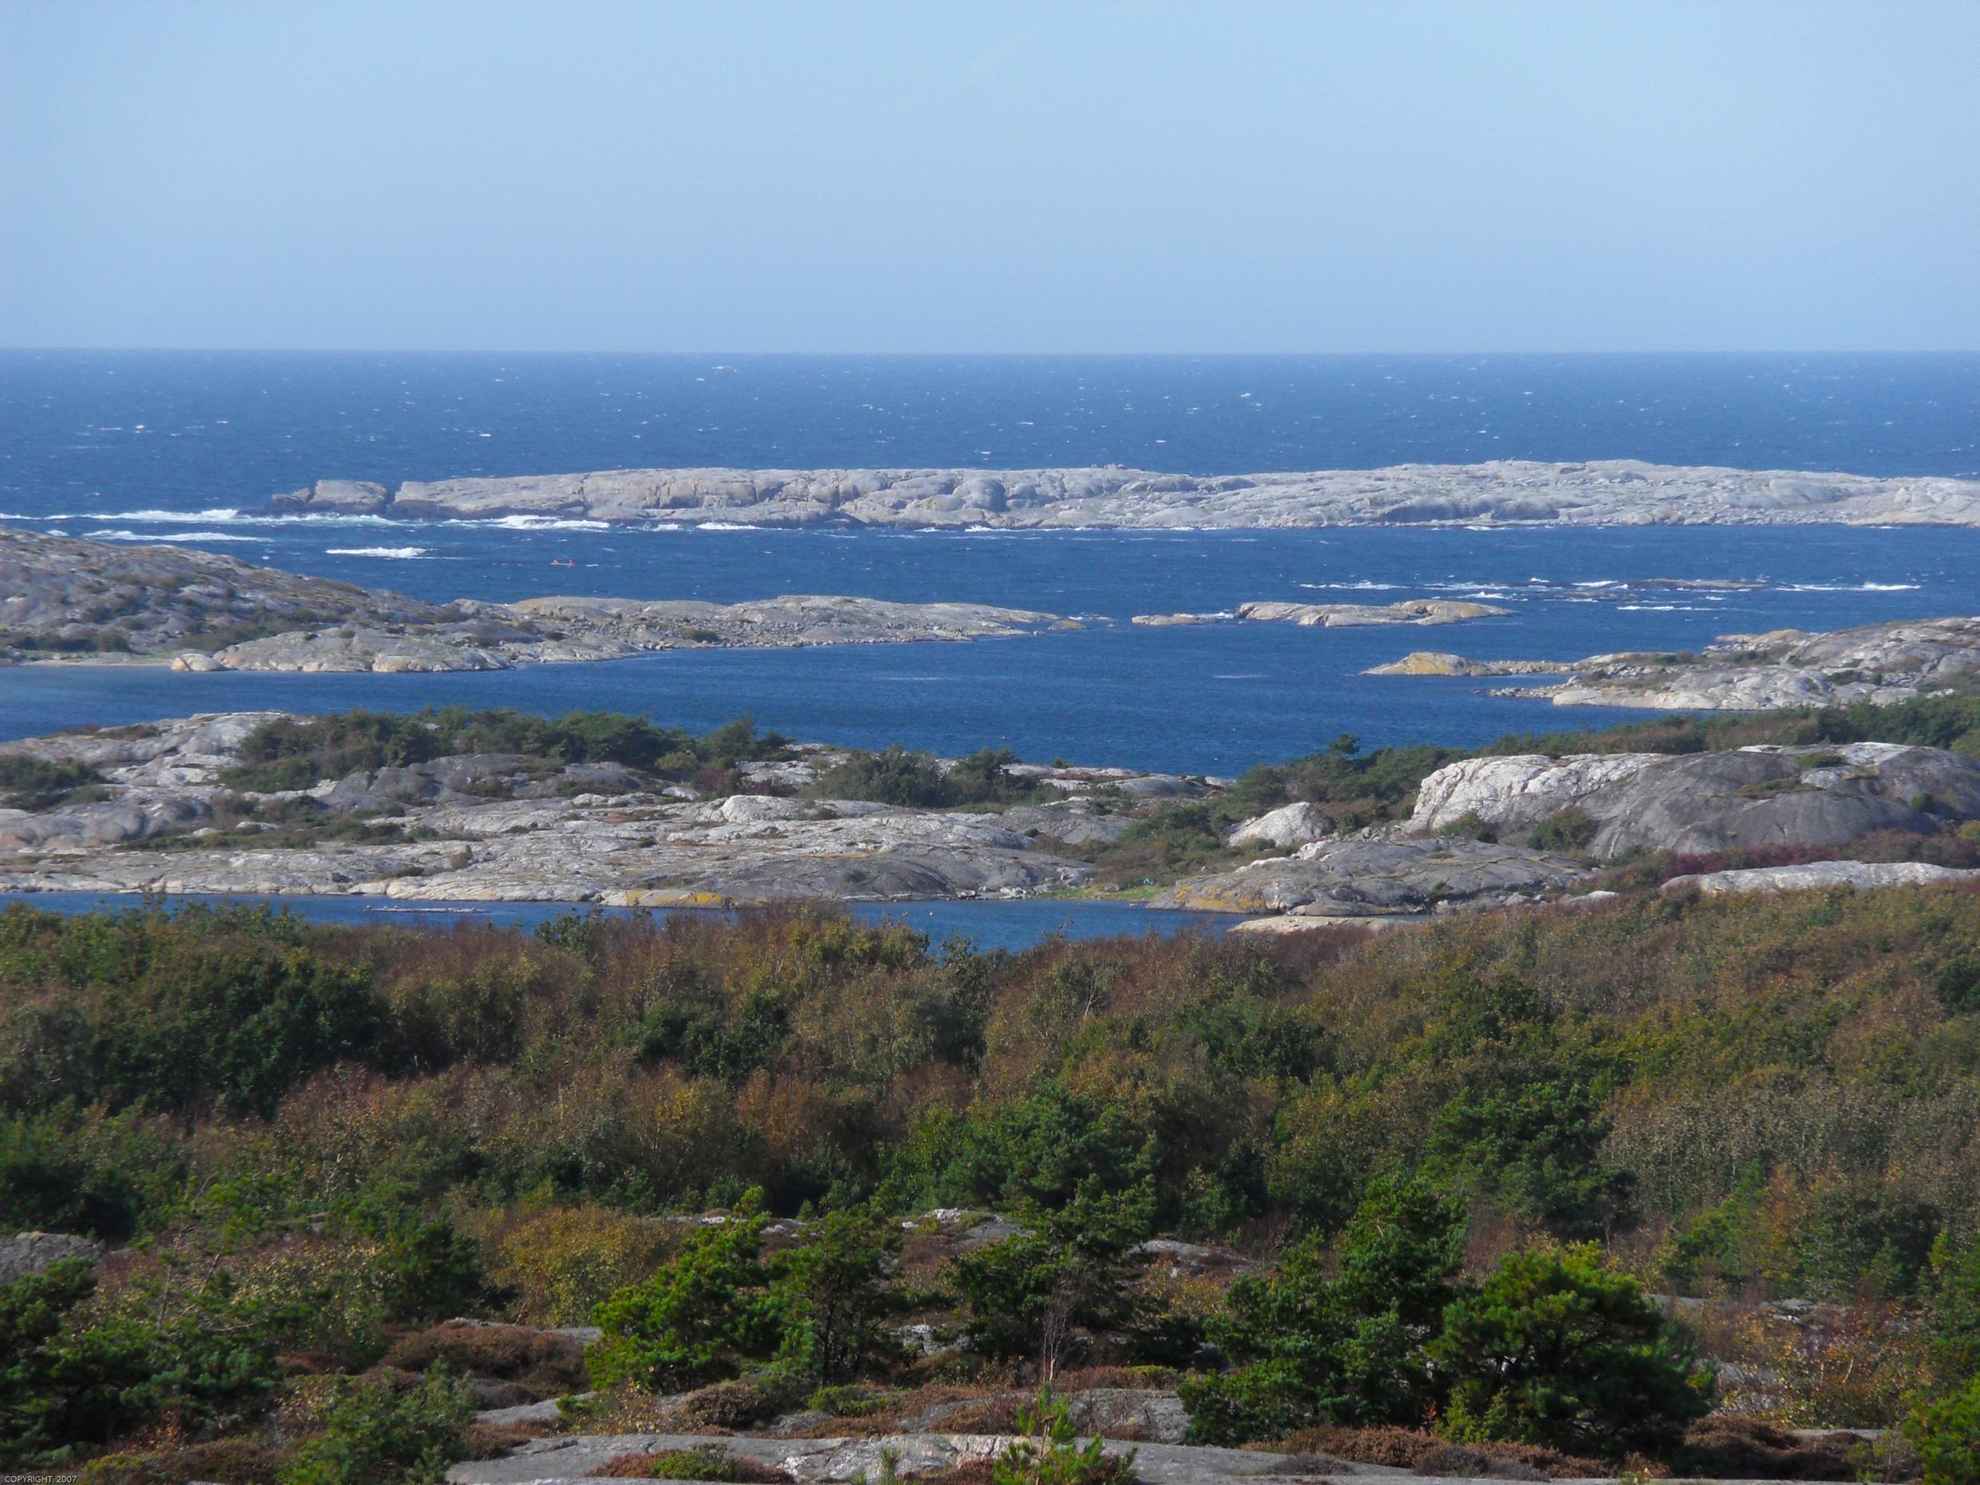 A few rocky islets of the Kosterhavet National Park lead out into the open ocean.